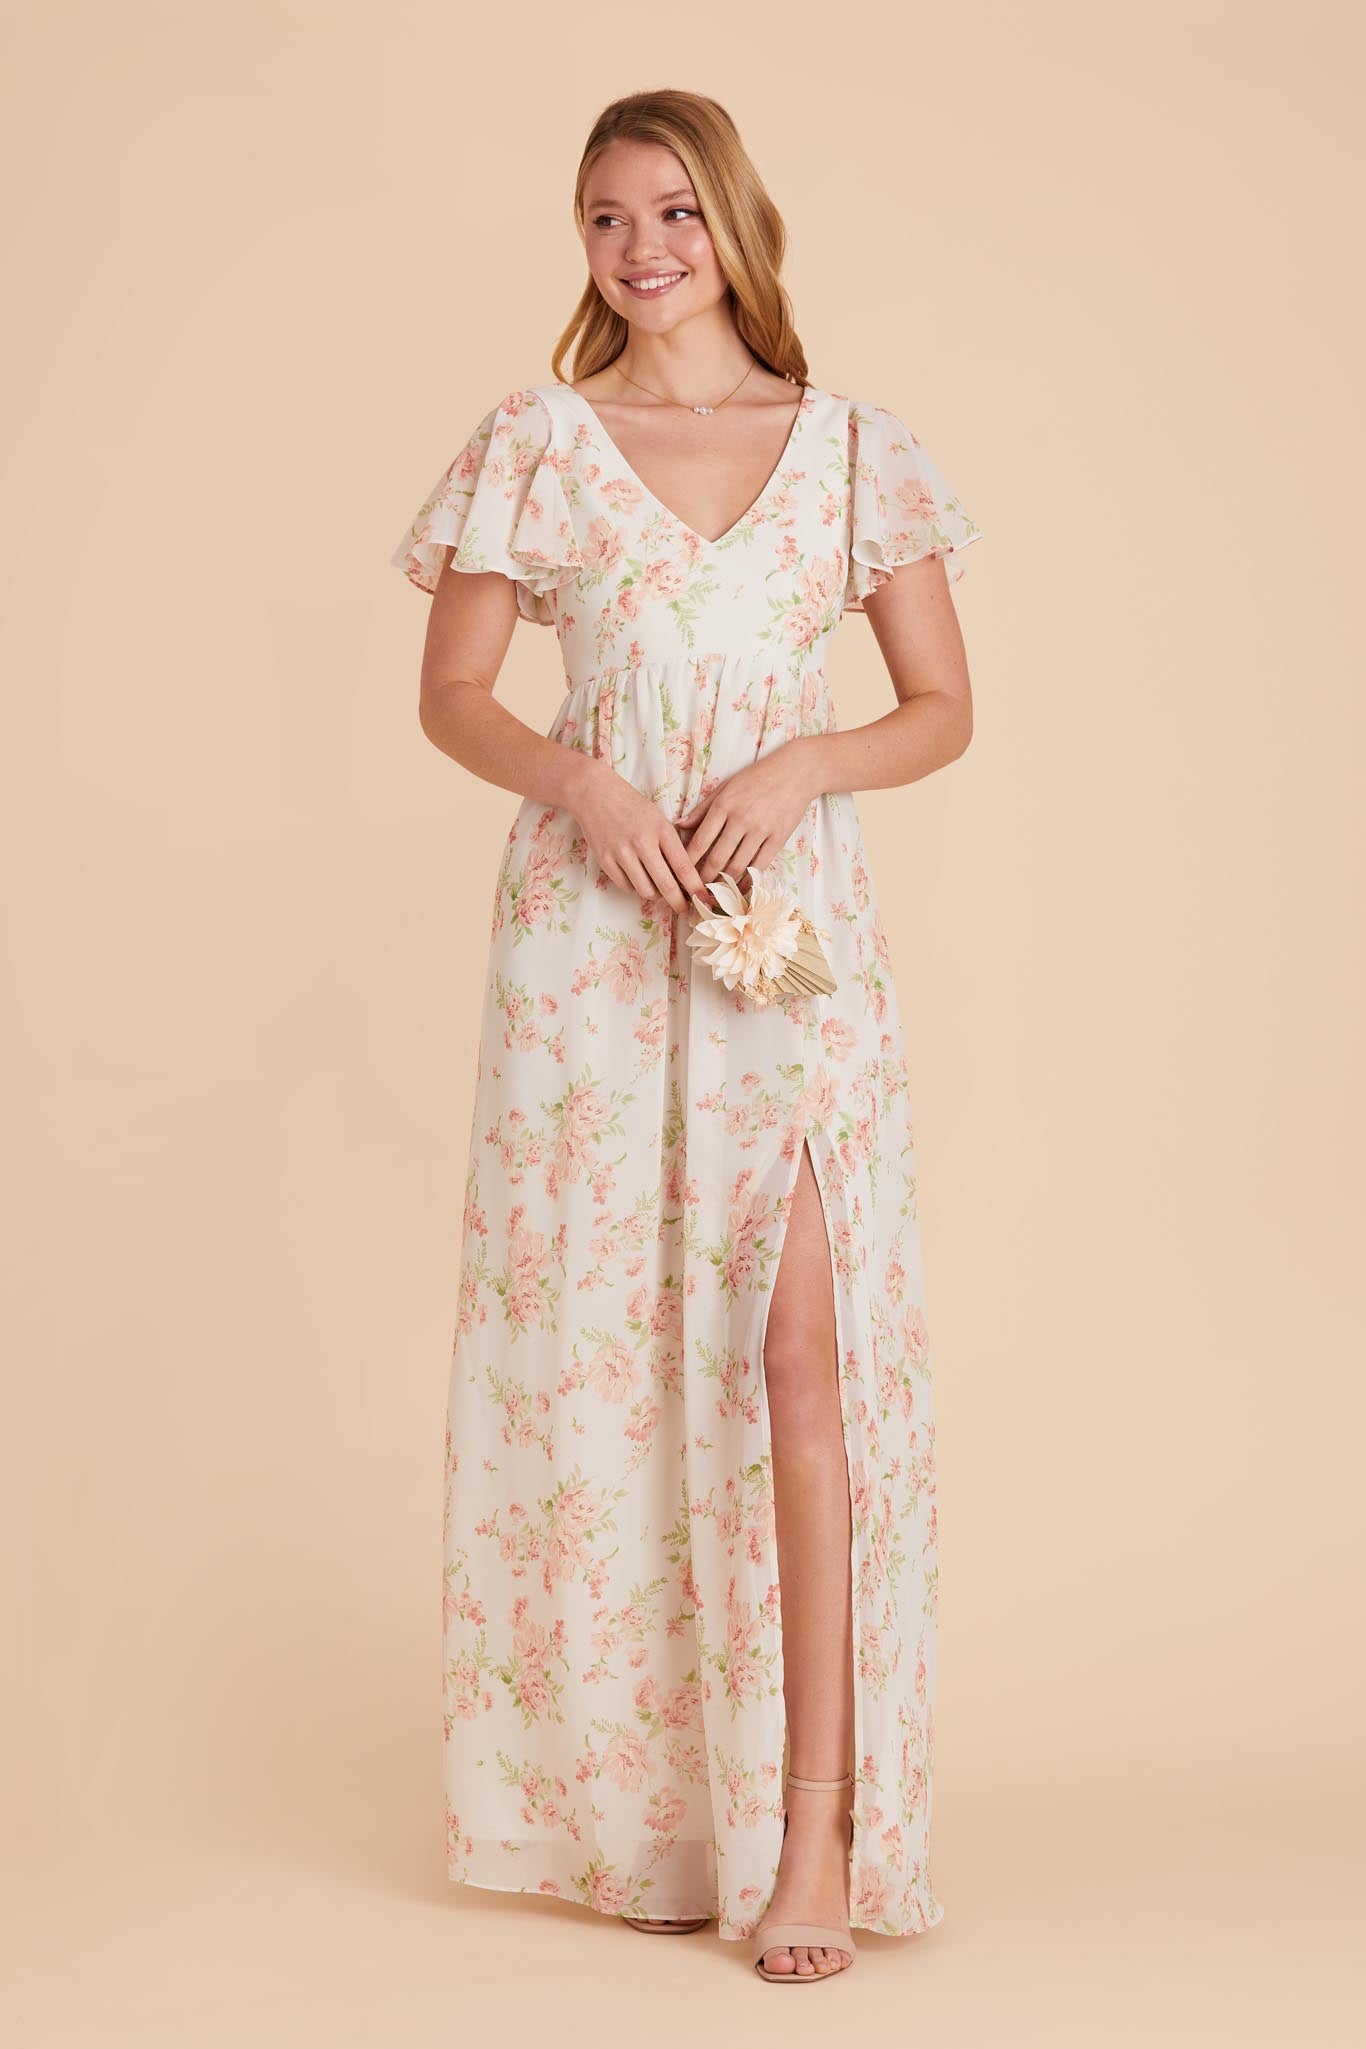 Whimsical Blooms Chiffon Dress by Birdy Grey